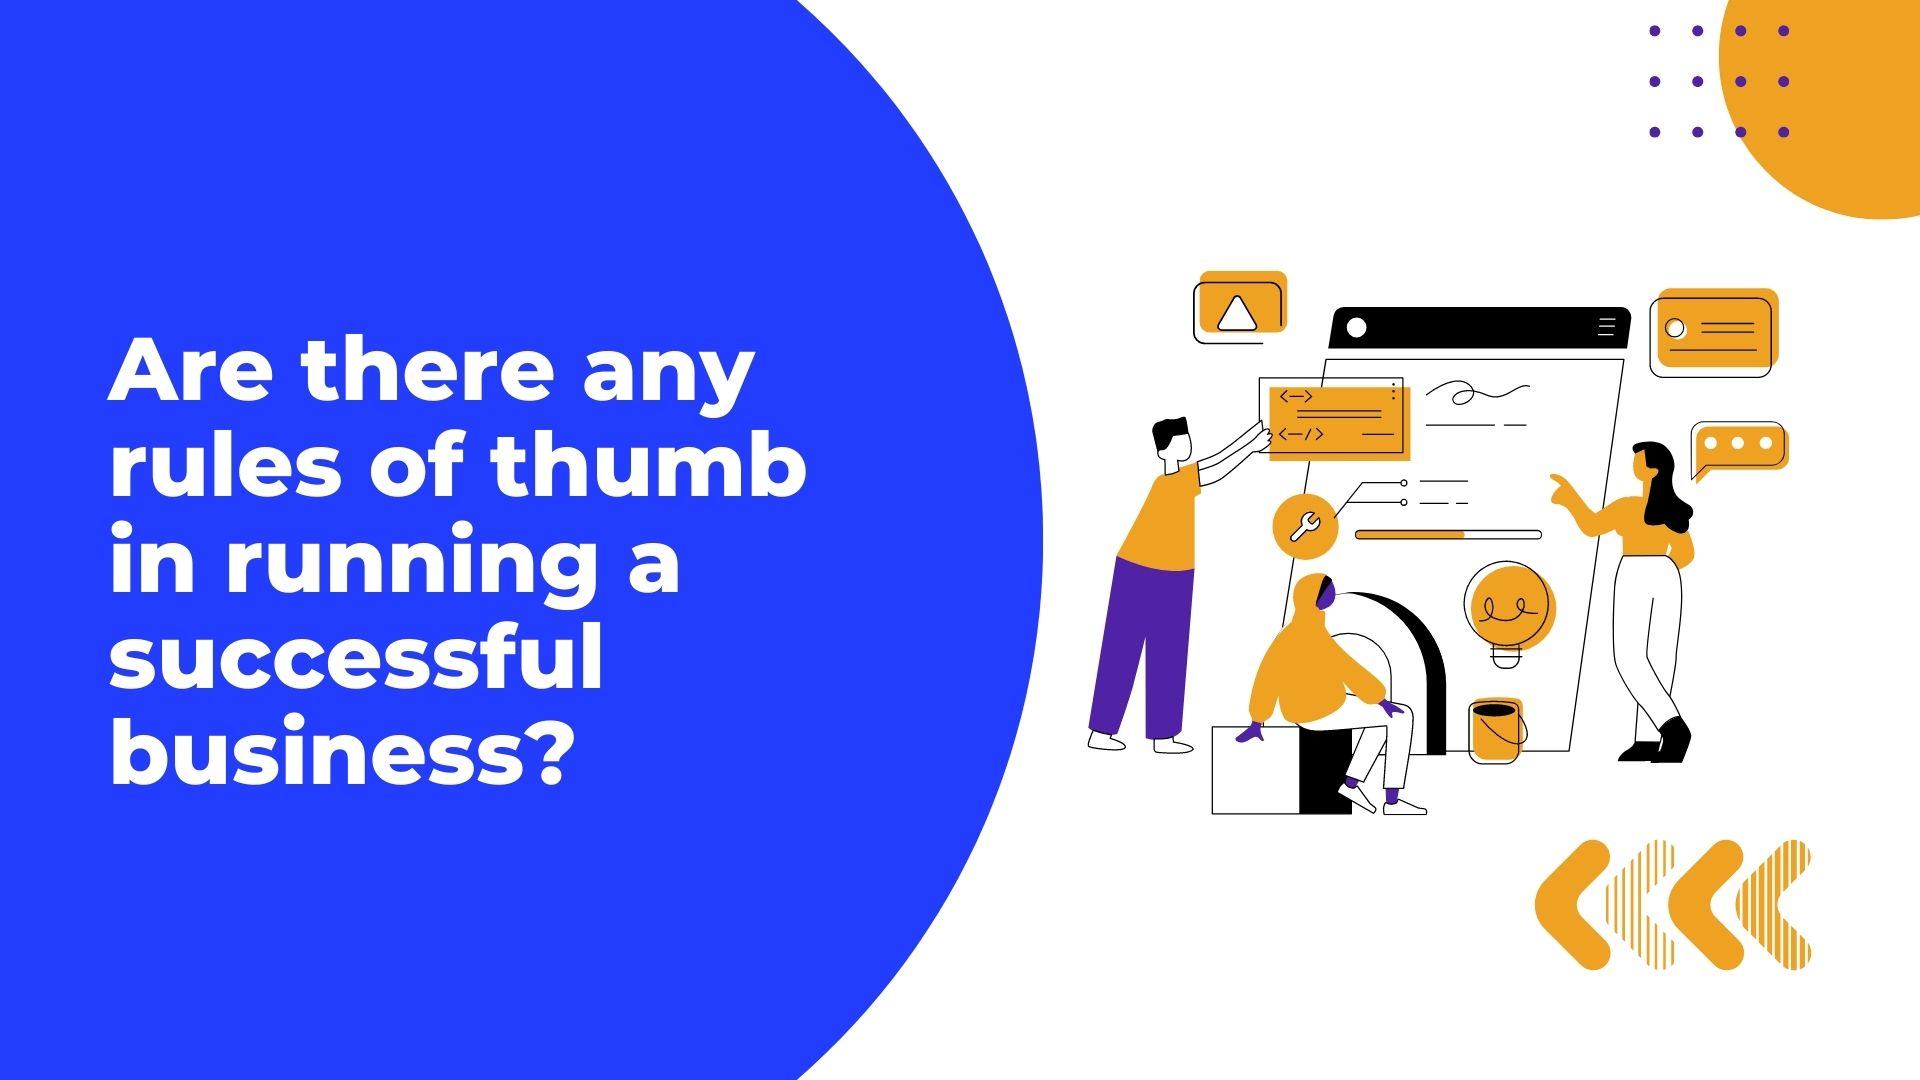 The Thumb Rules for Running a Successful Business